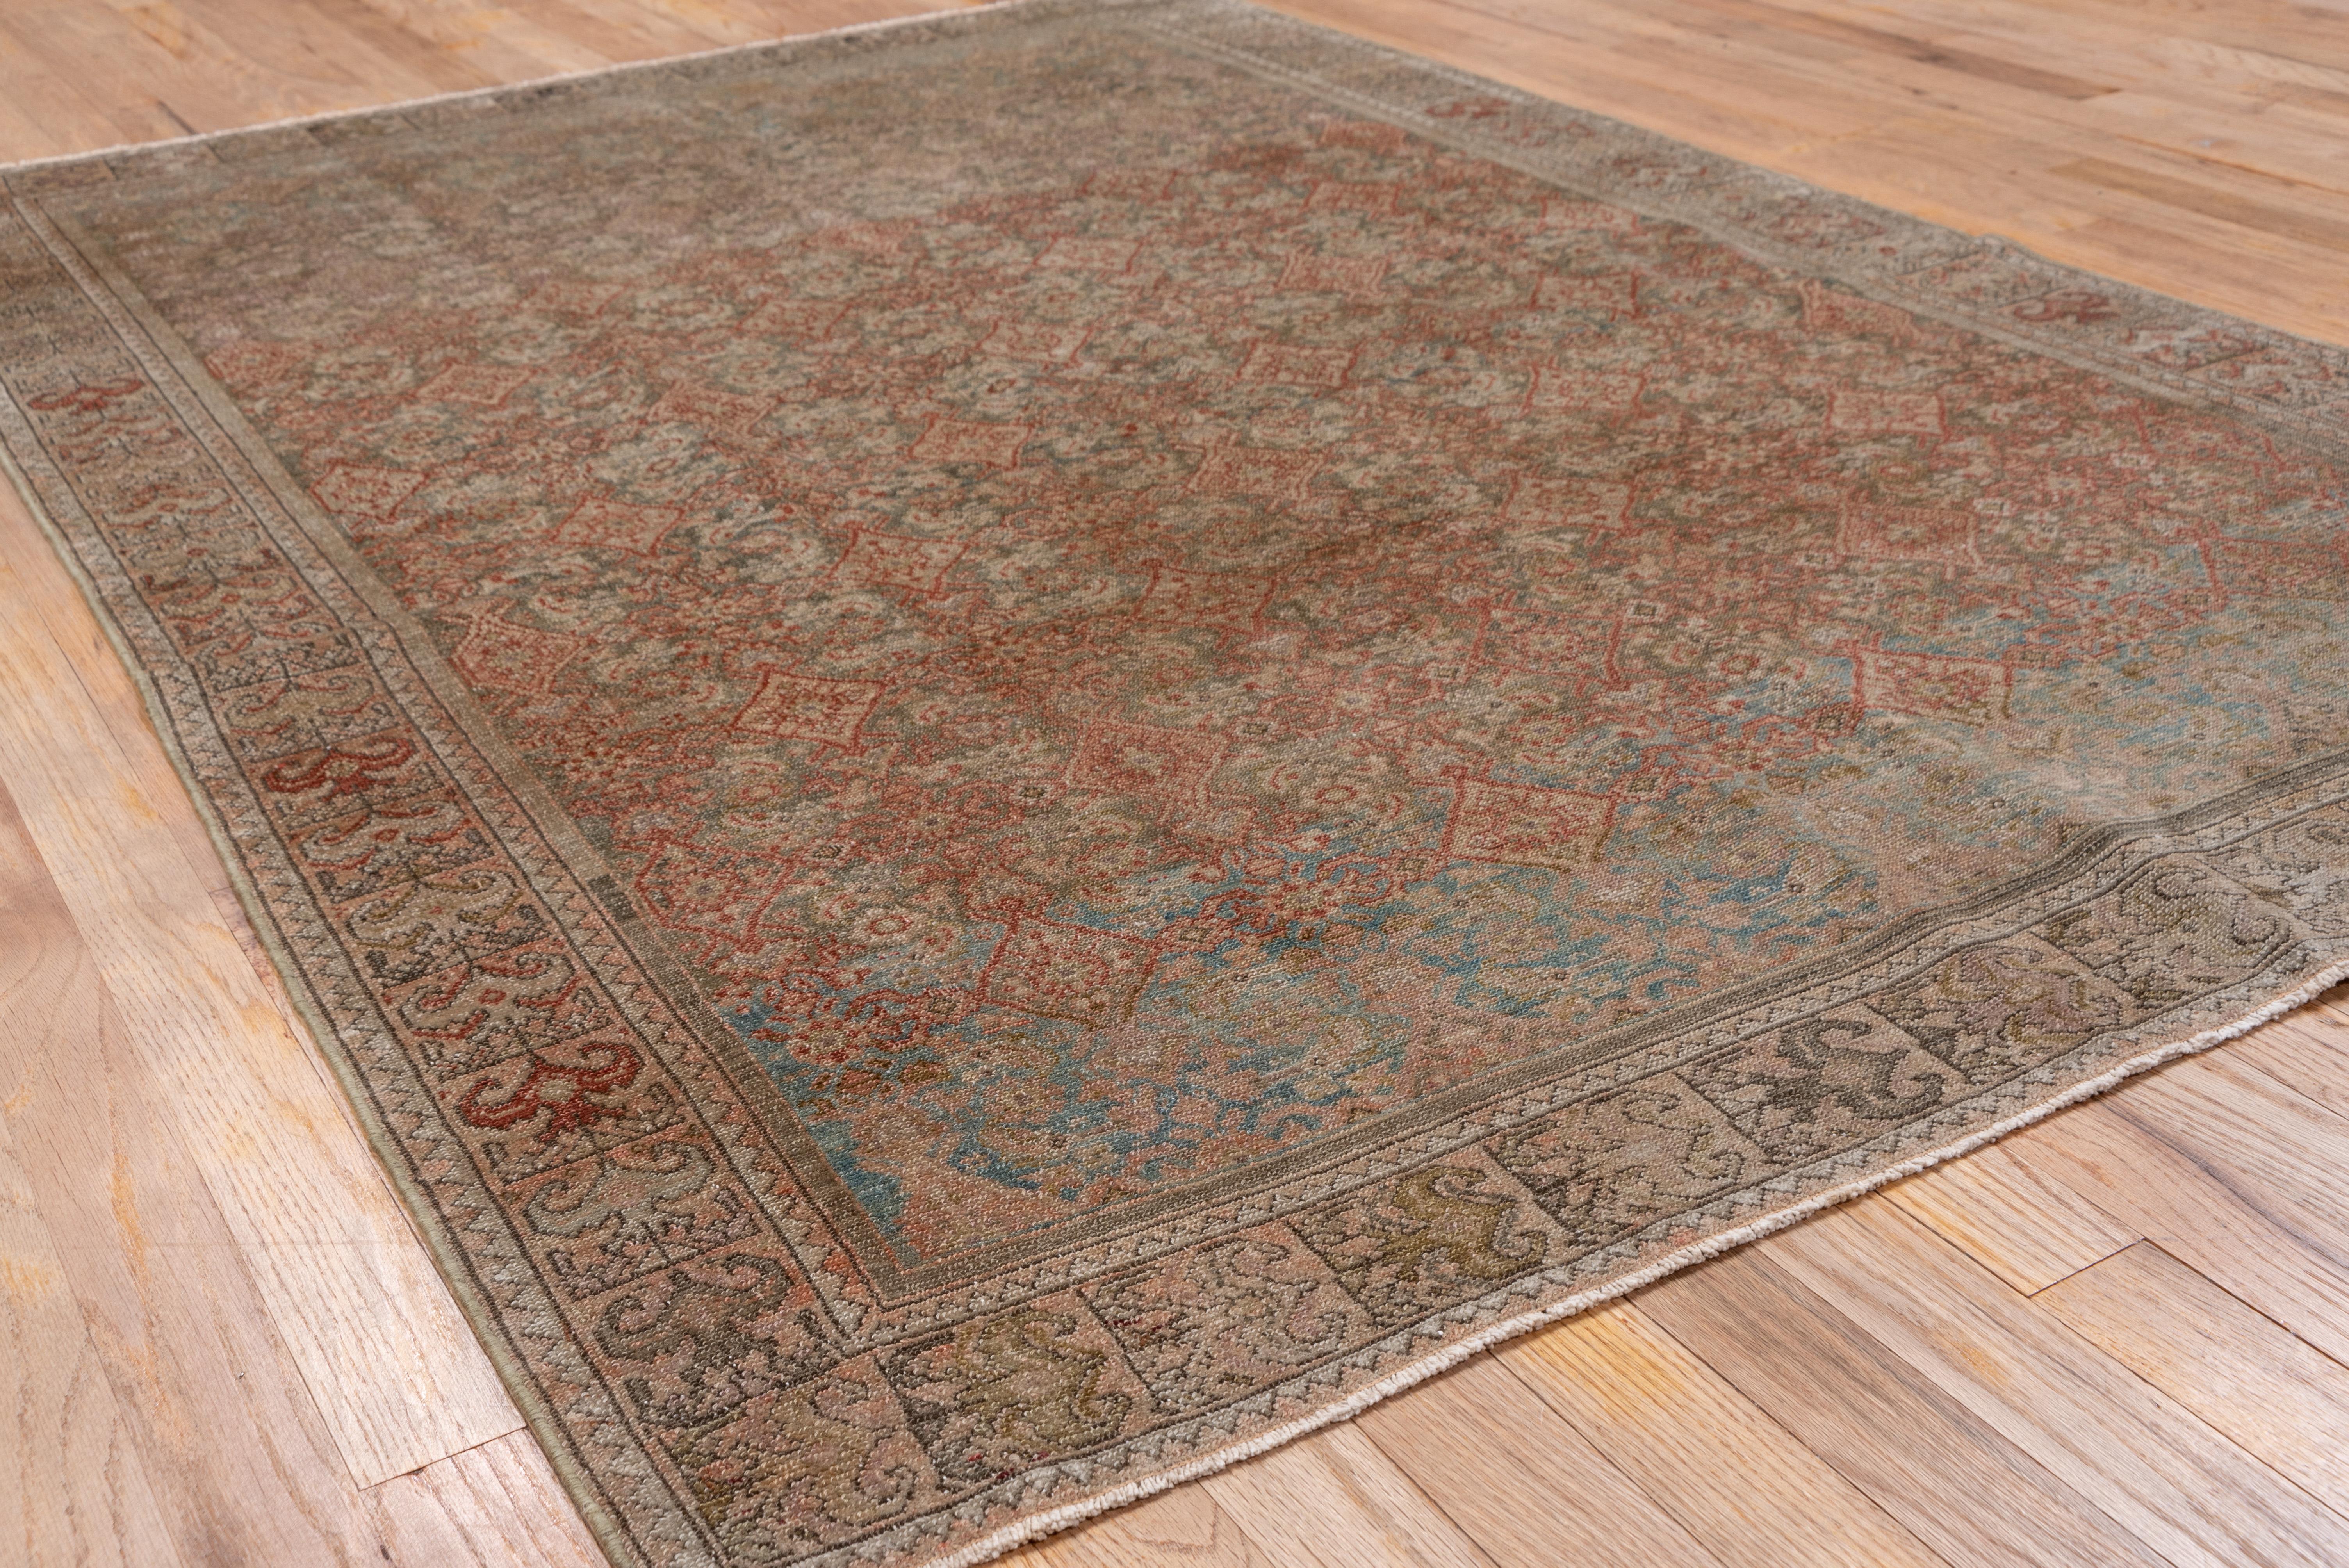 Rustic Antique Persian Malayer Rug, All-Over Brown and Blue Herati Design Field 1